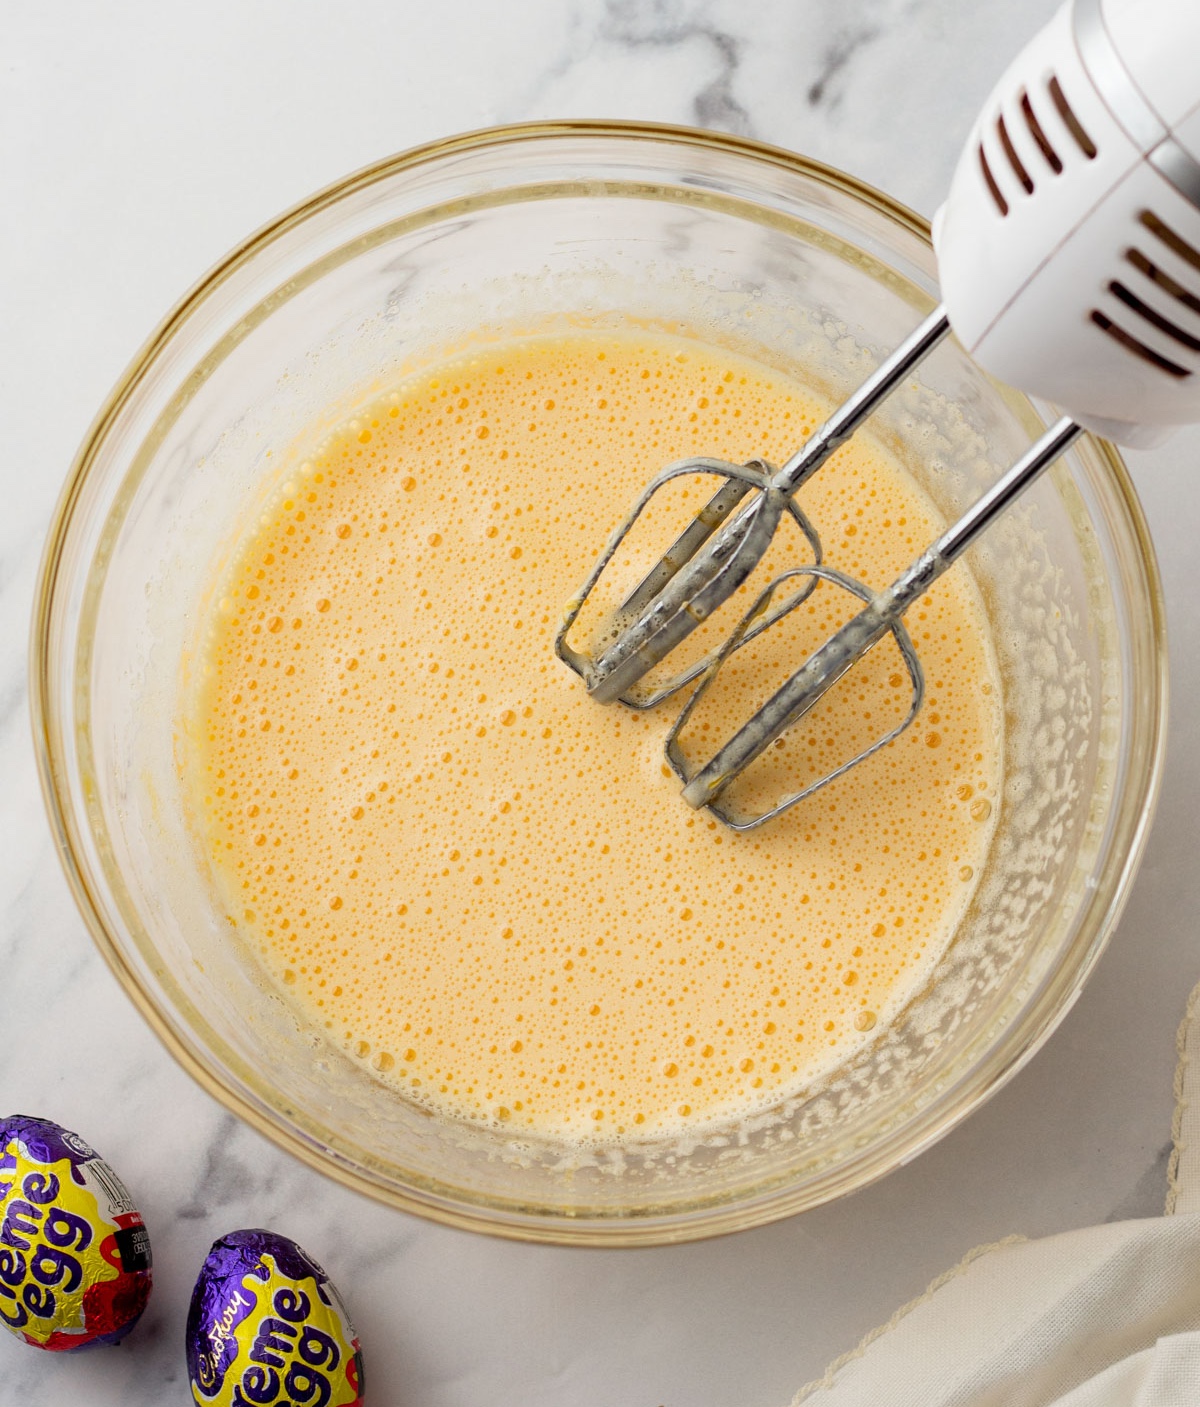 Sugar, eggs, and vanilla whisked together with a hand mixer